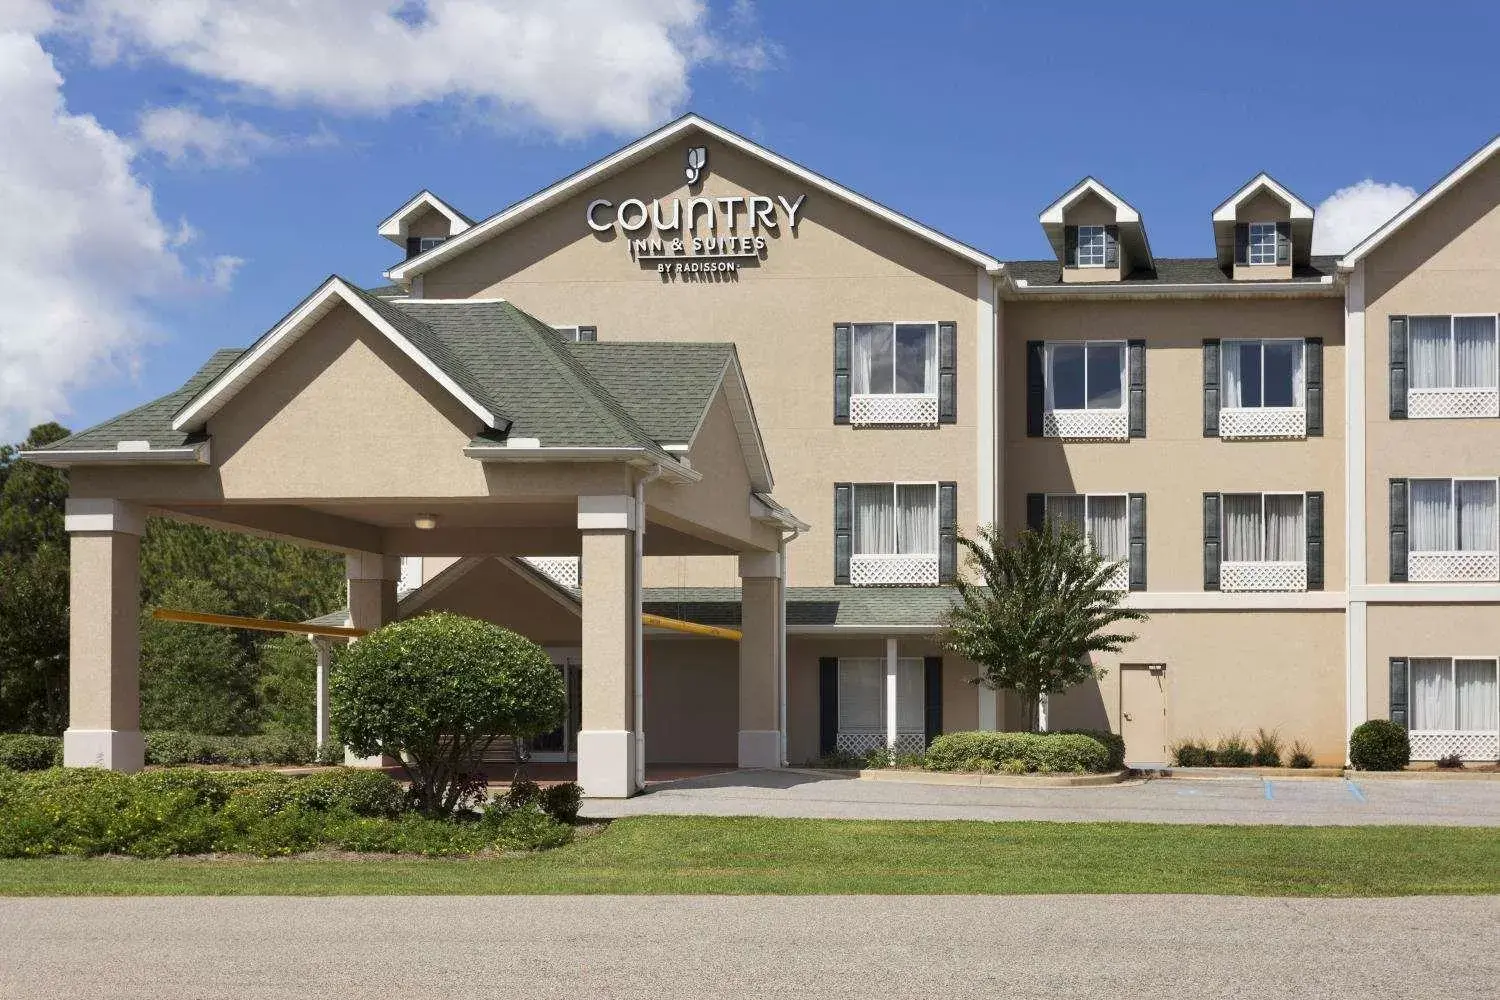 Property building in Country Inn & Suites by Radisson, Saraland, AL